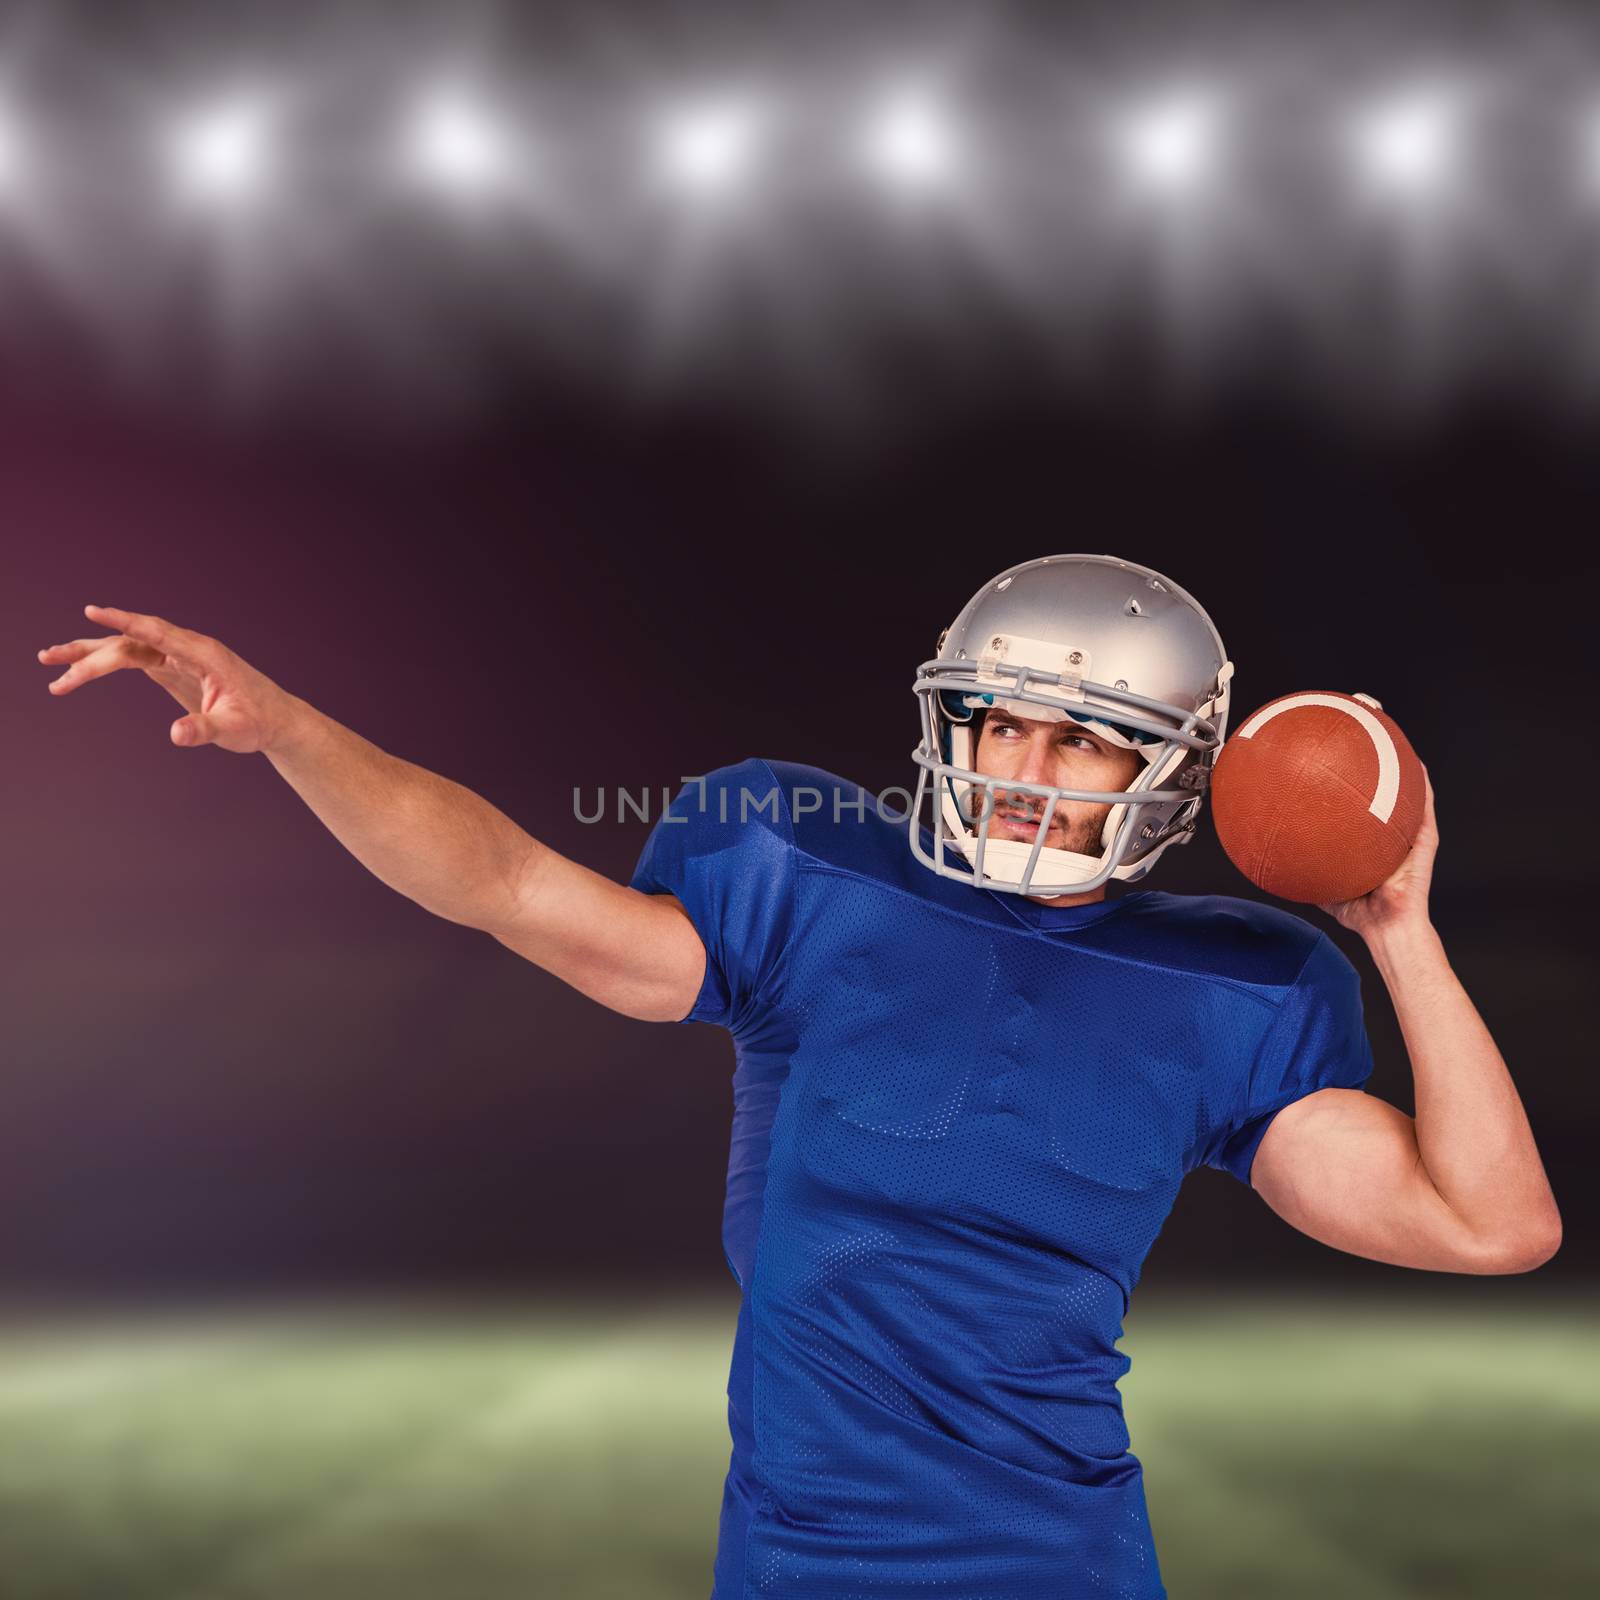 American football player about to throw the ball against rugby pitch